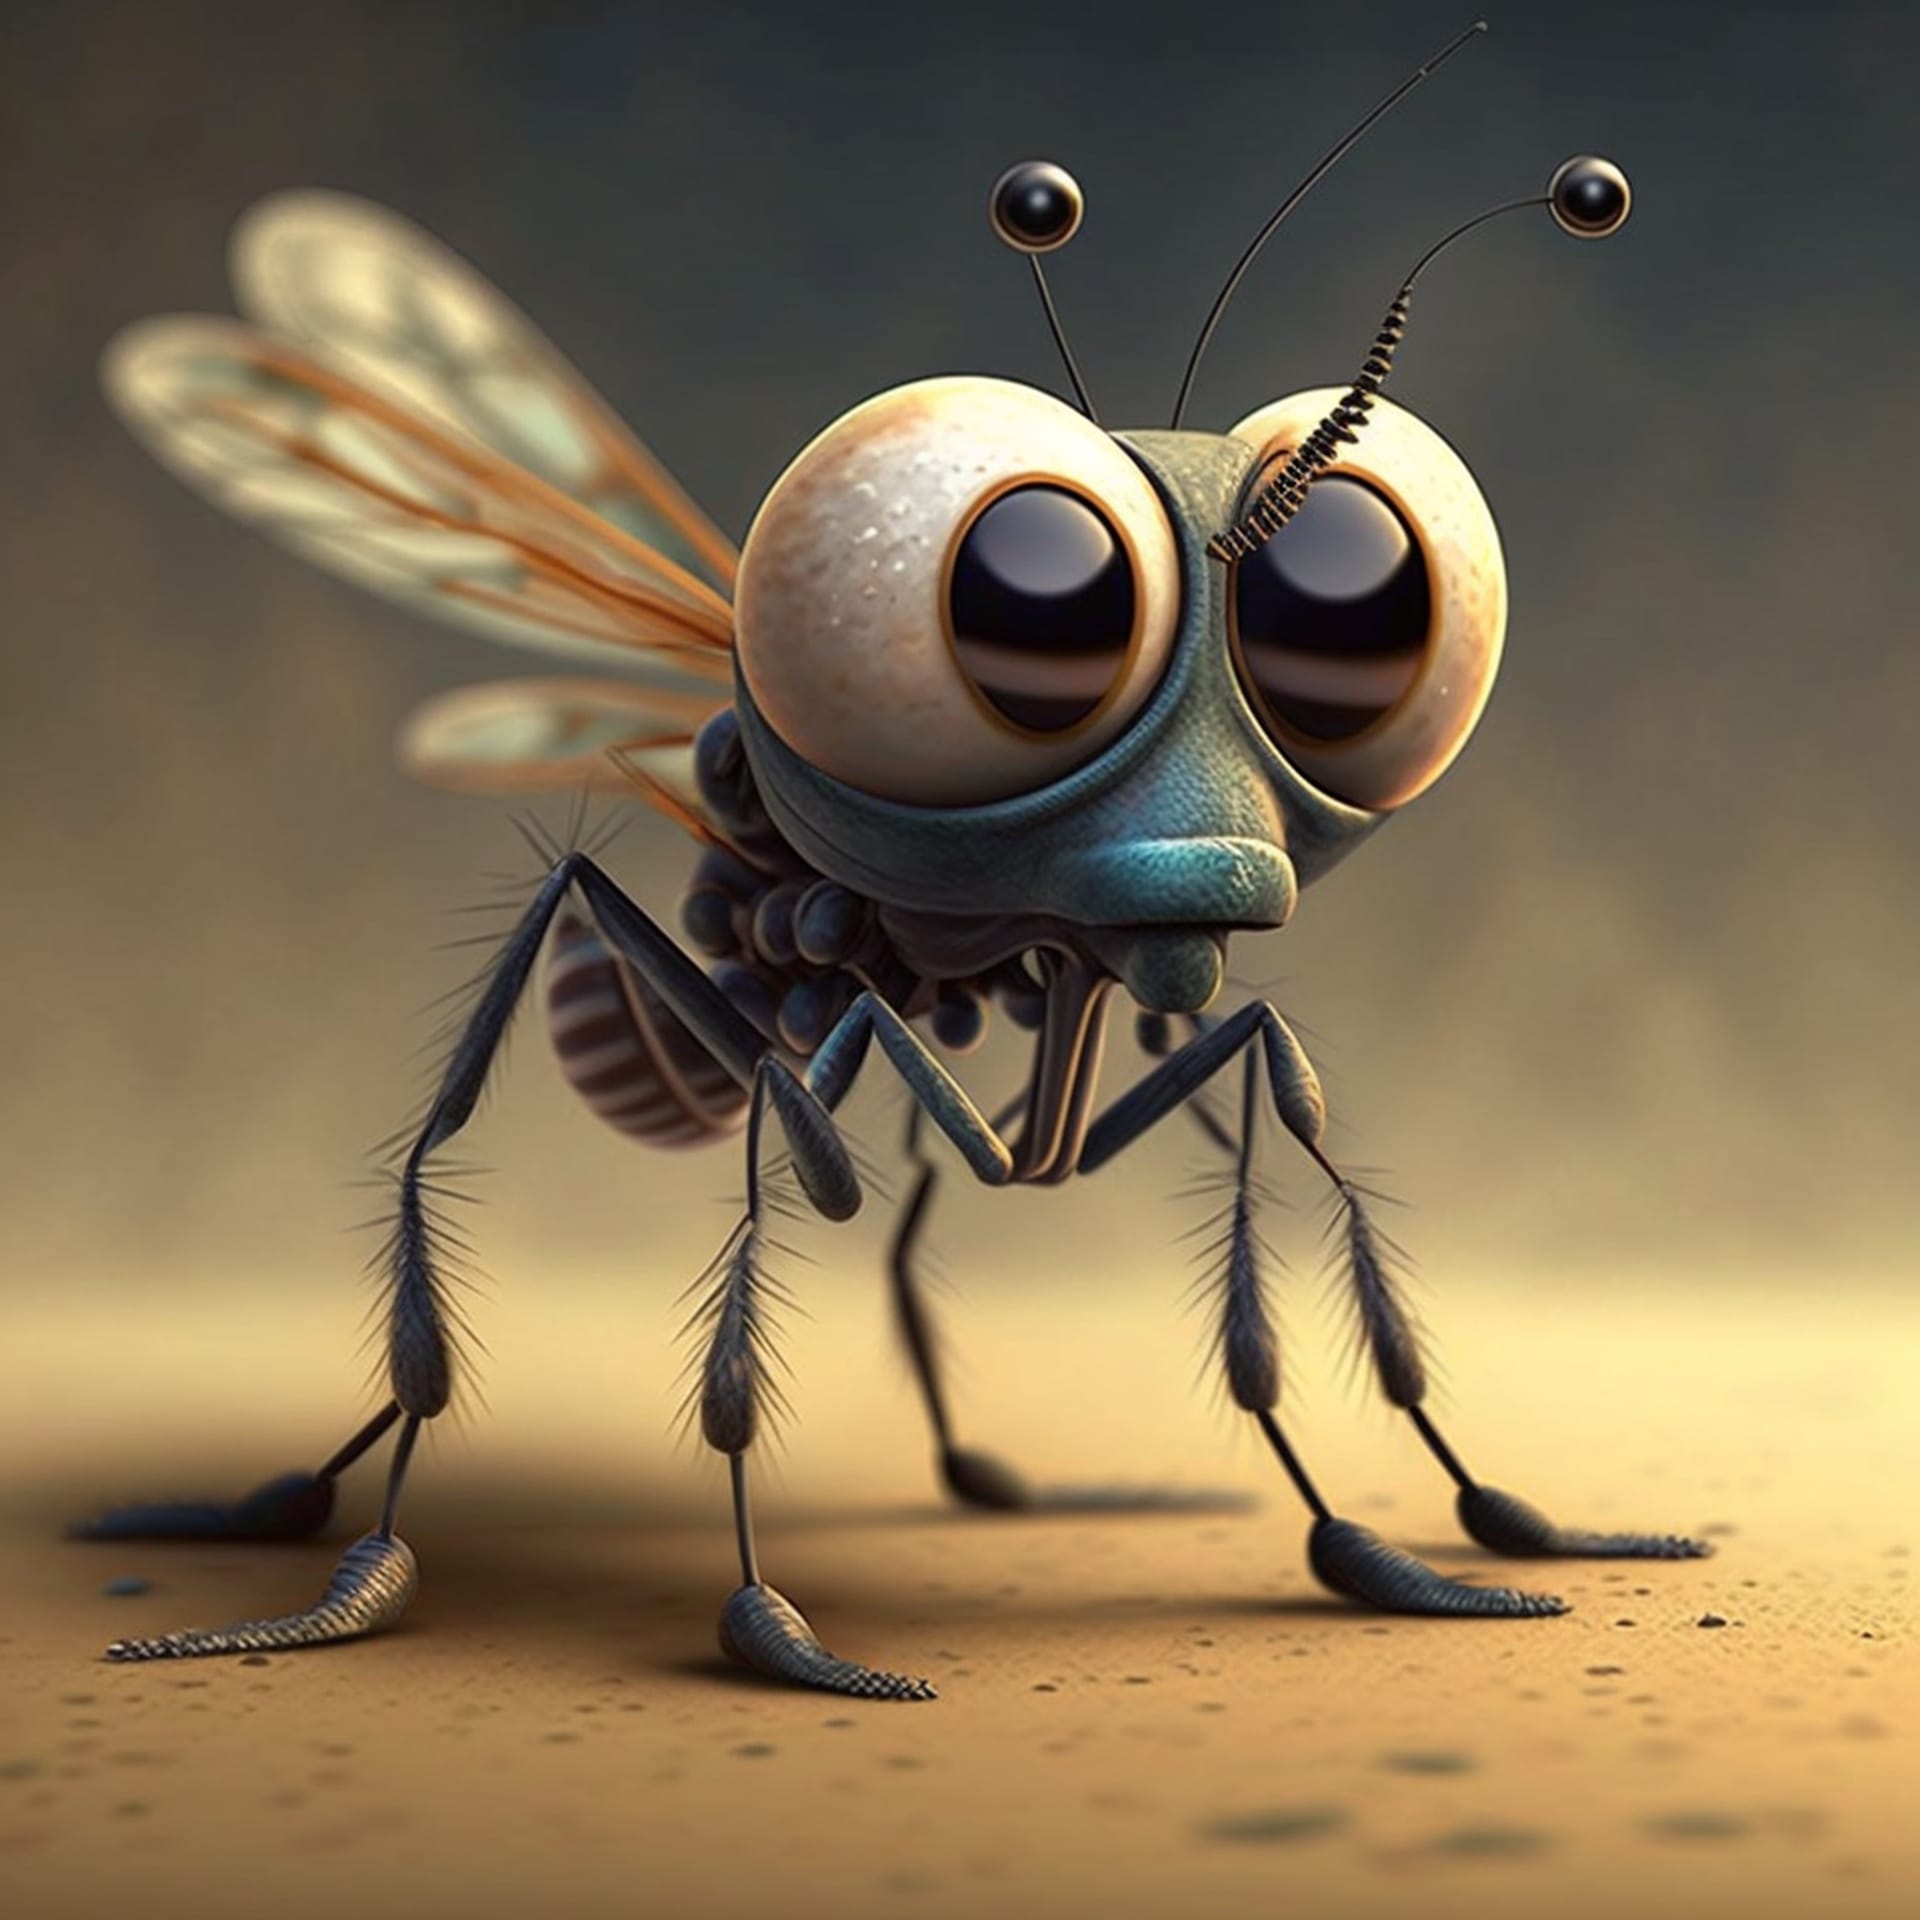 Cute mosquito character image cute animal pictures